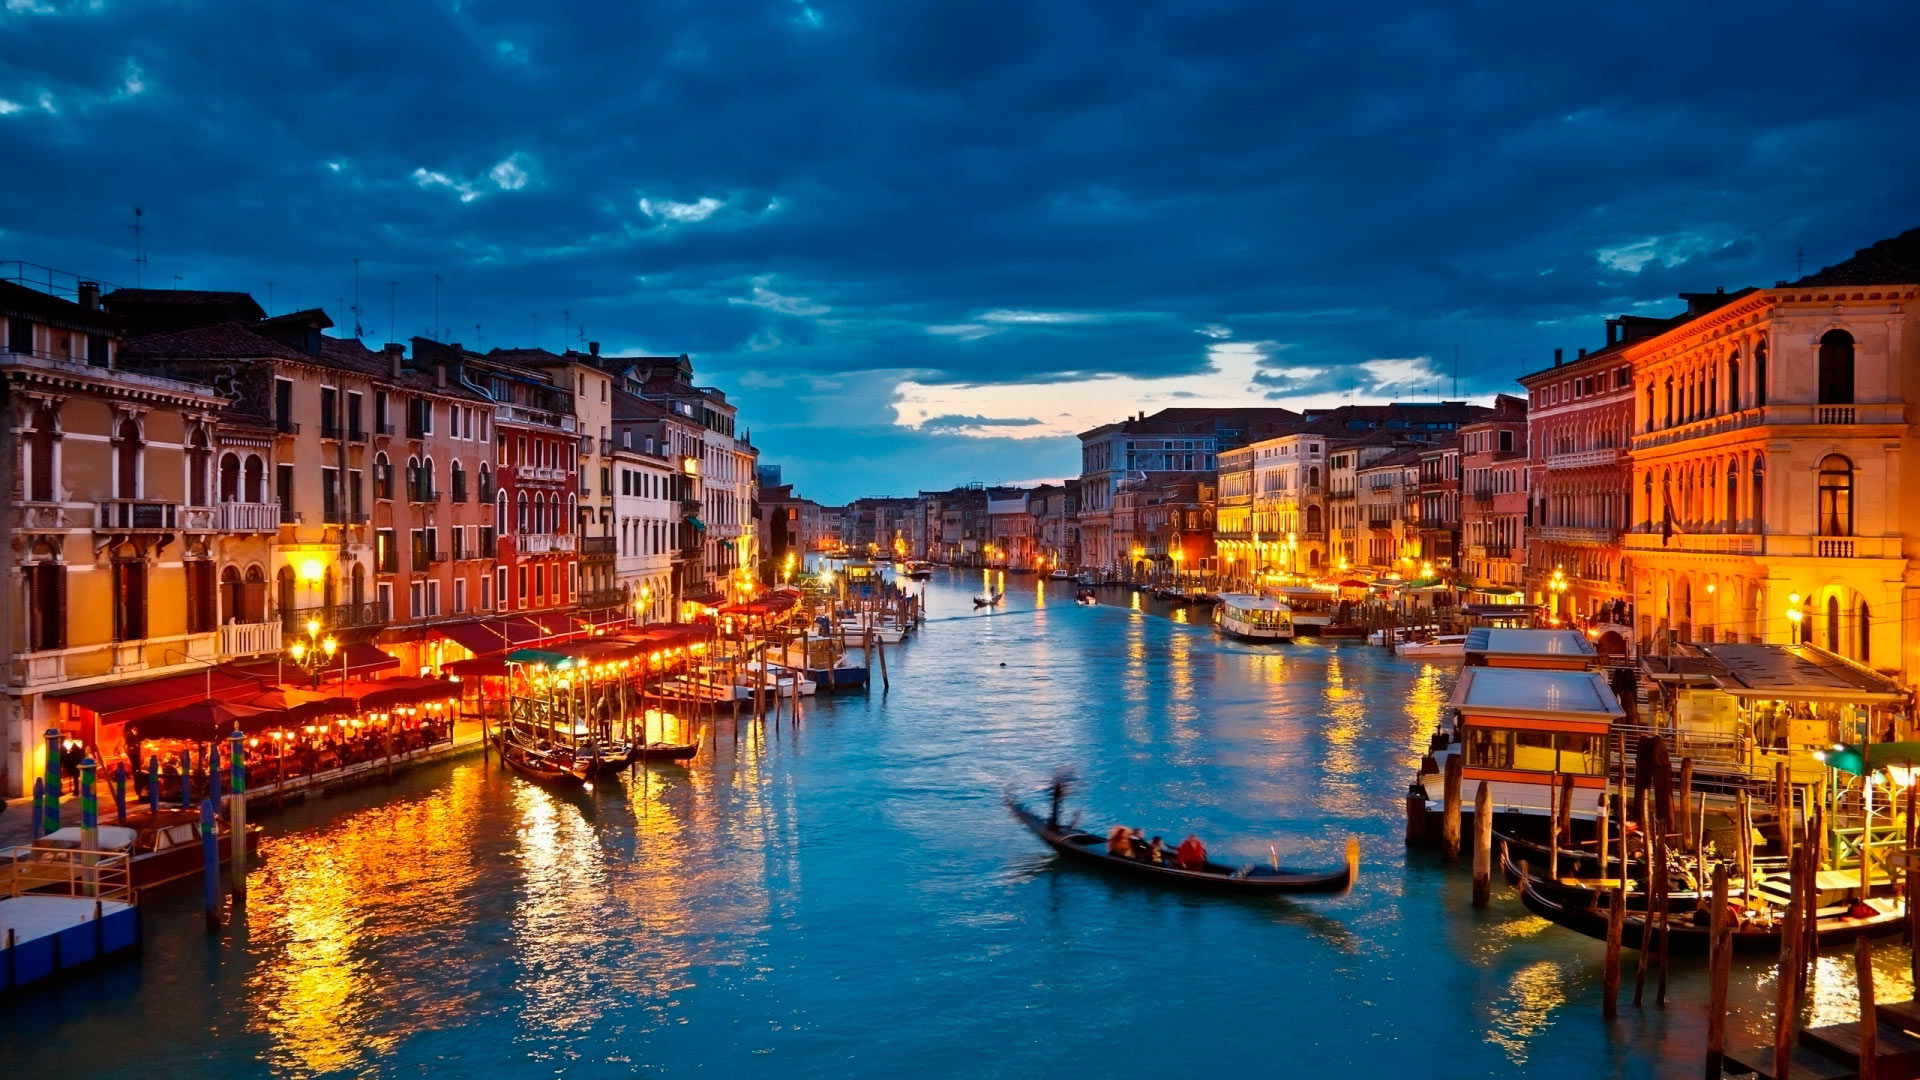 Venice Italy, The Most Romantic City in the World